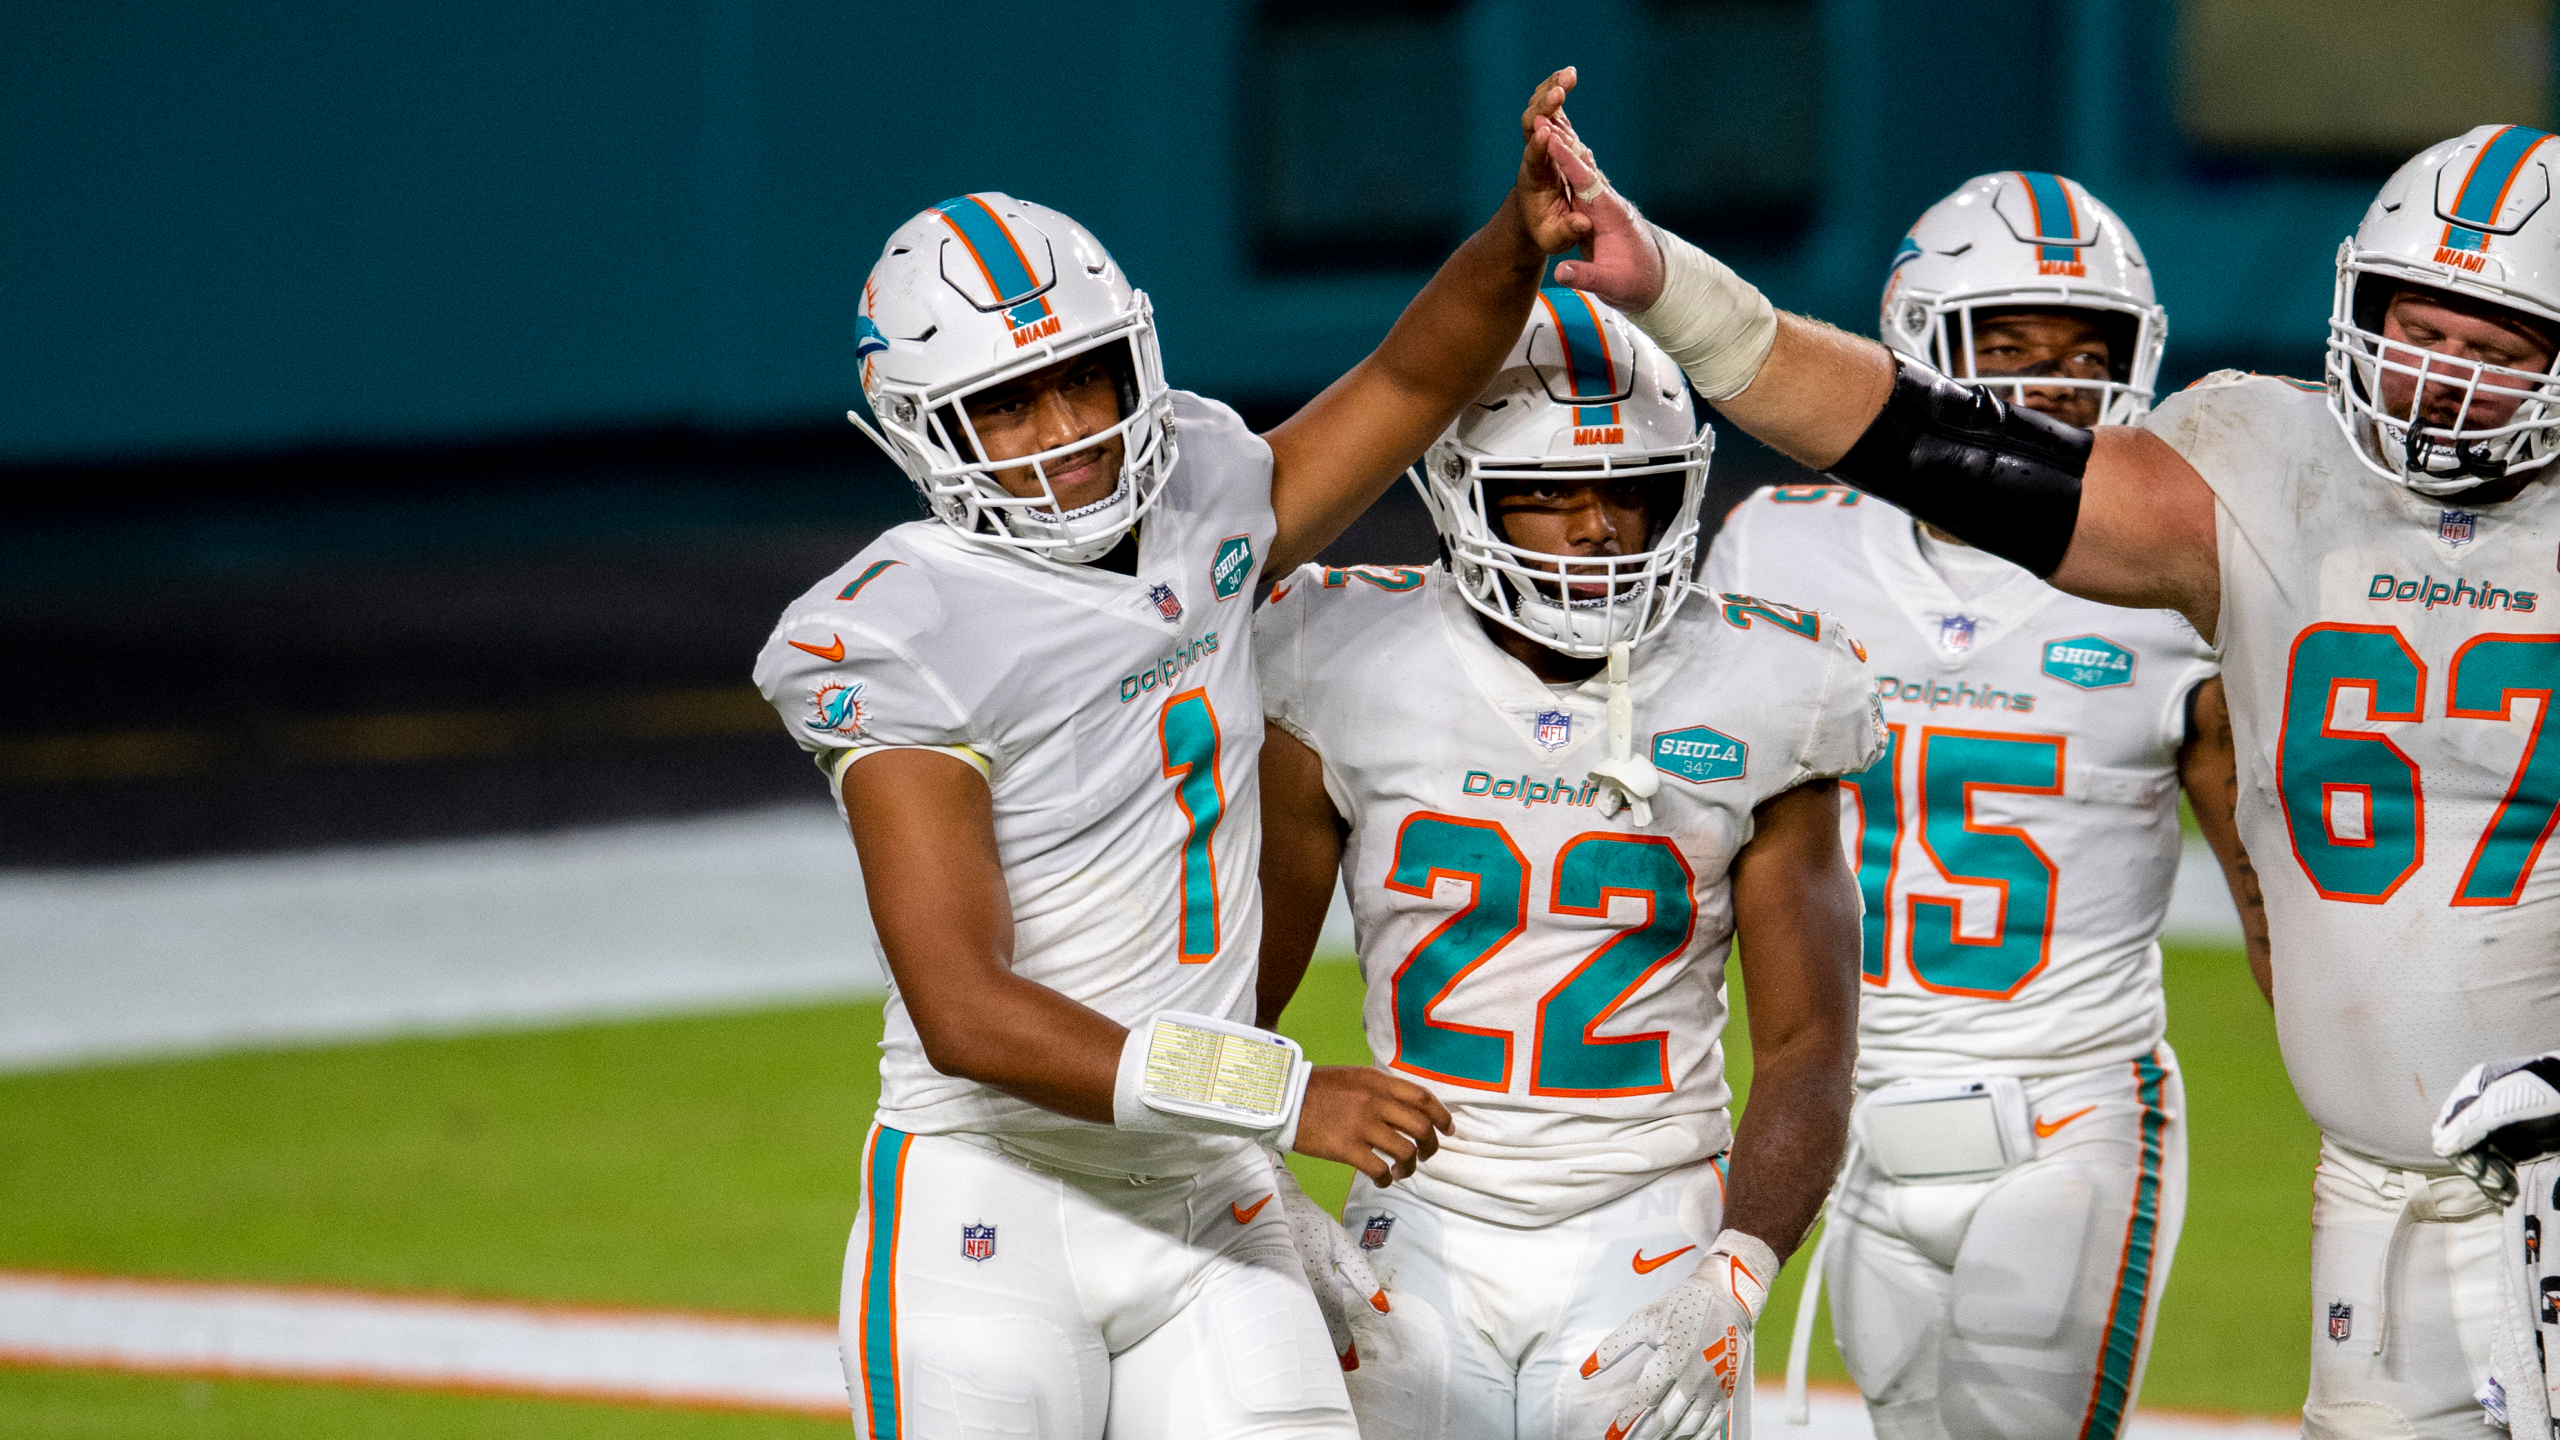 What does success look like for the 2021 Miami Dolphins? - Aqua Thirteen